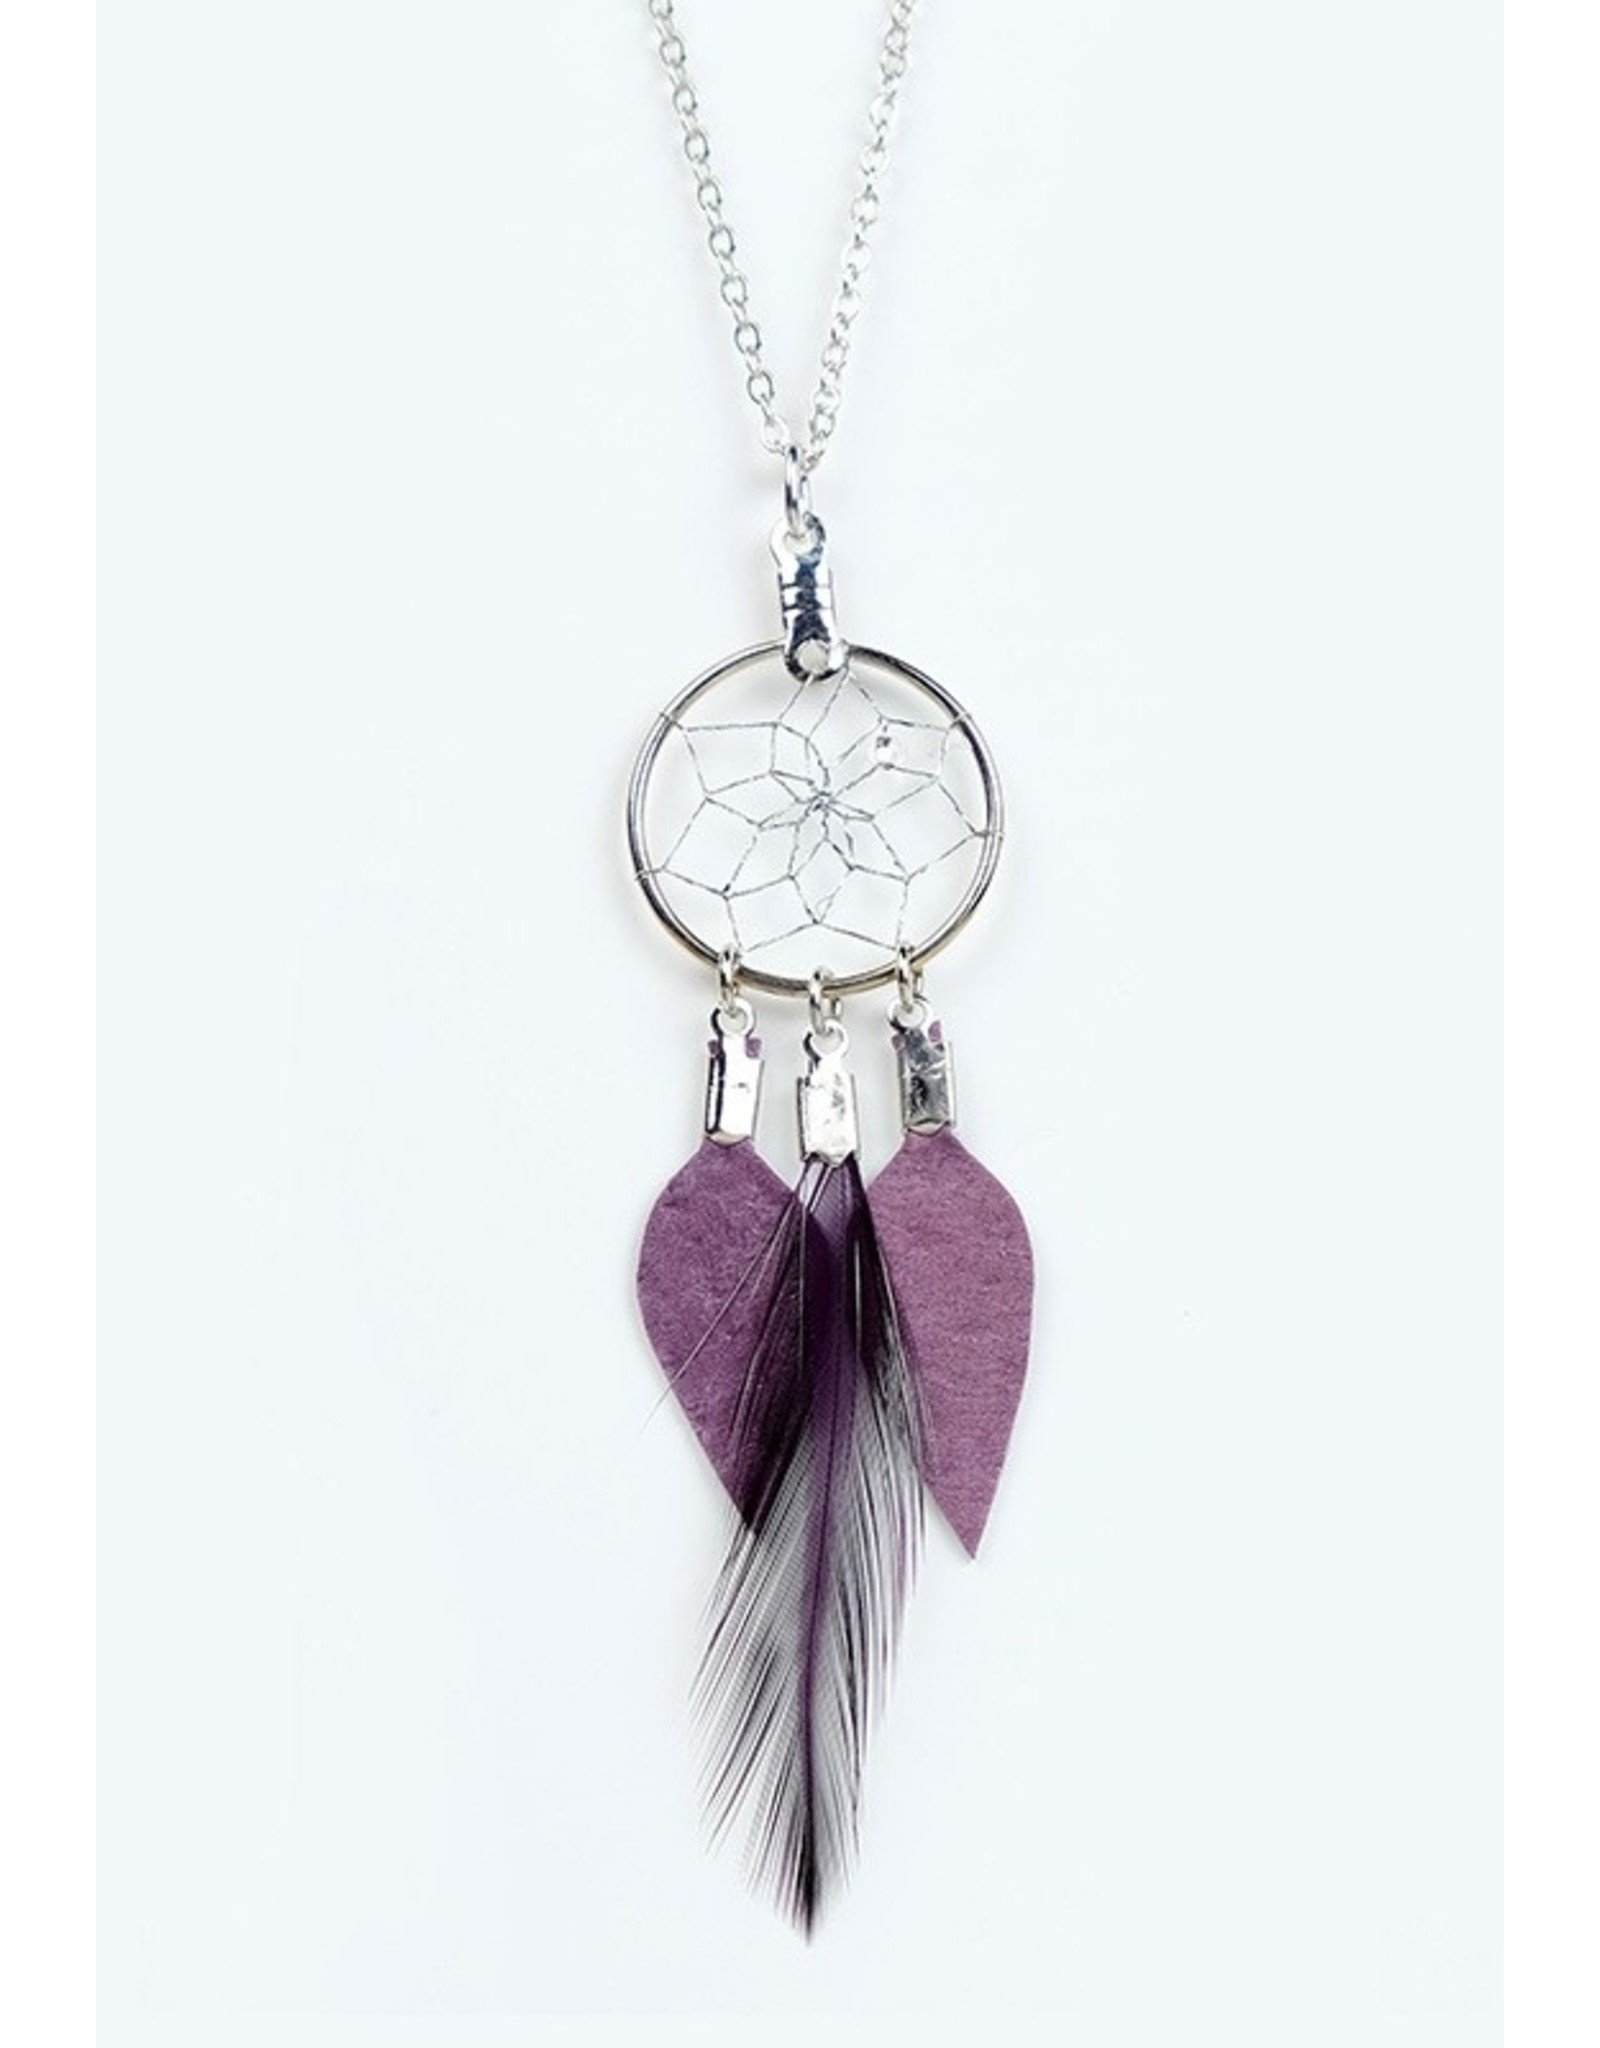 Dream Catcher Necklace with Feather and Leather - DC1010-P